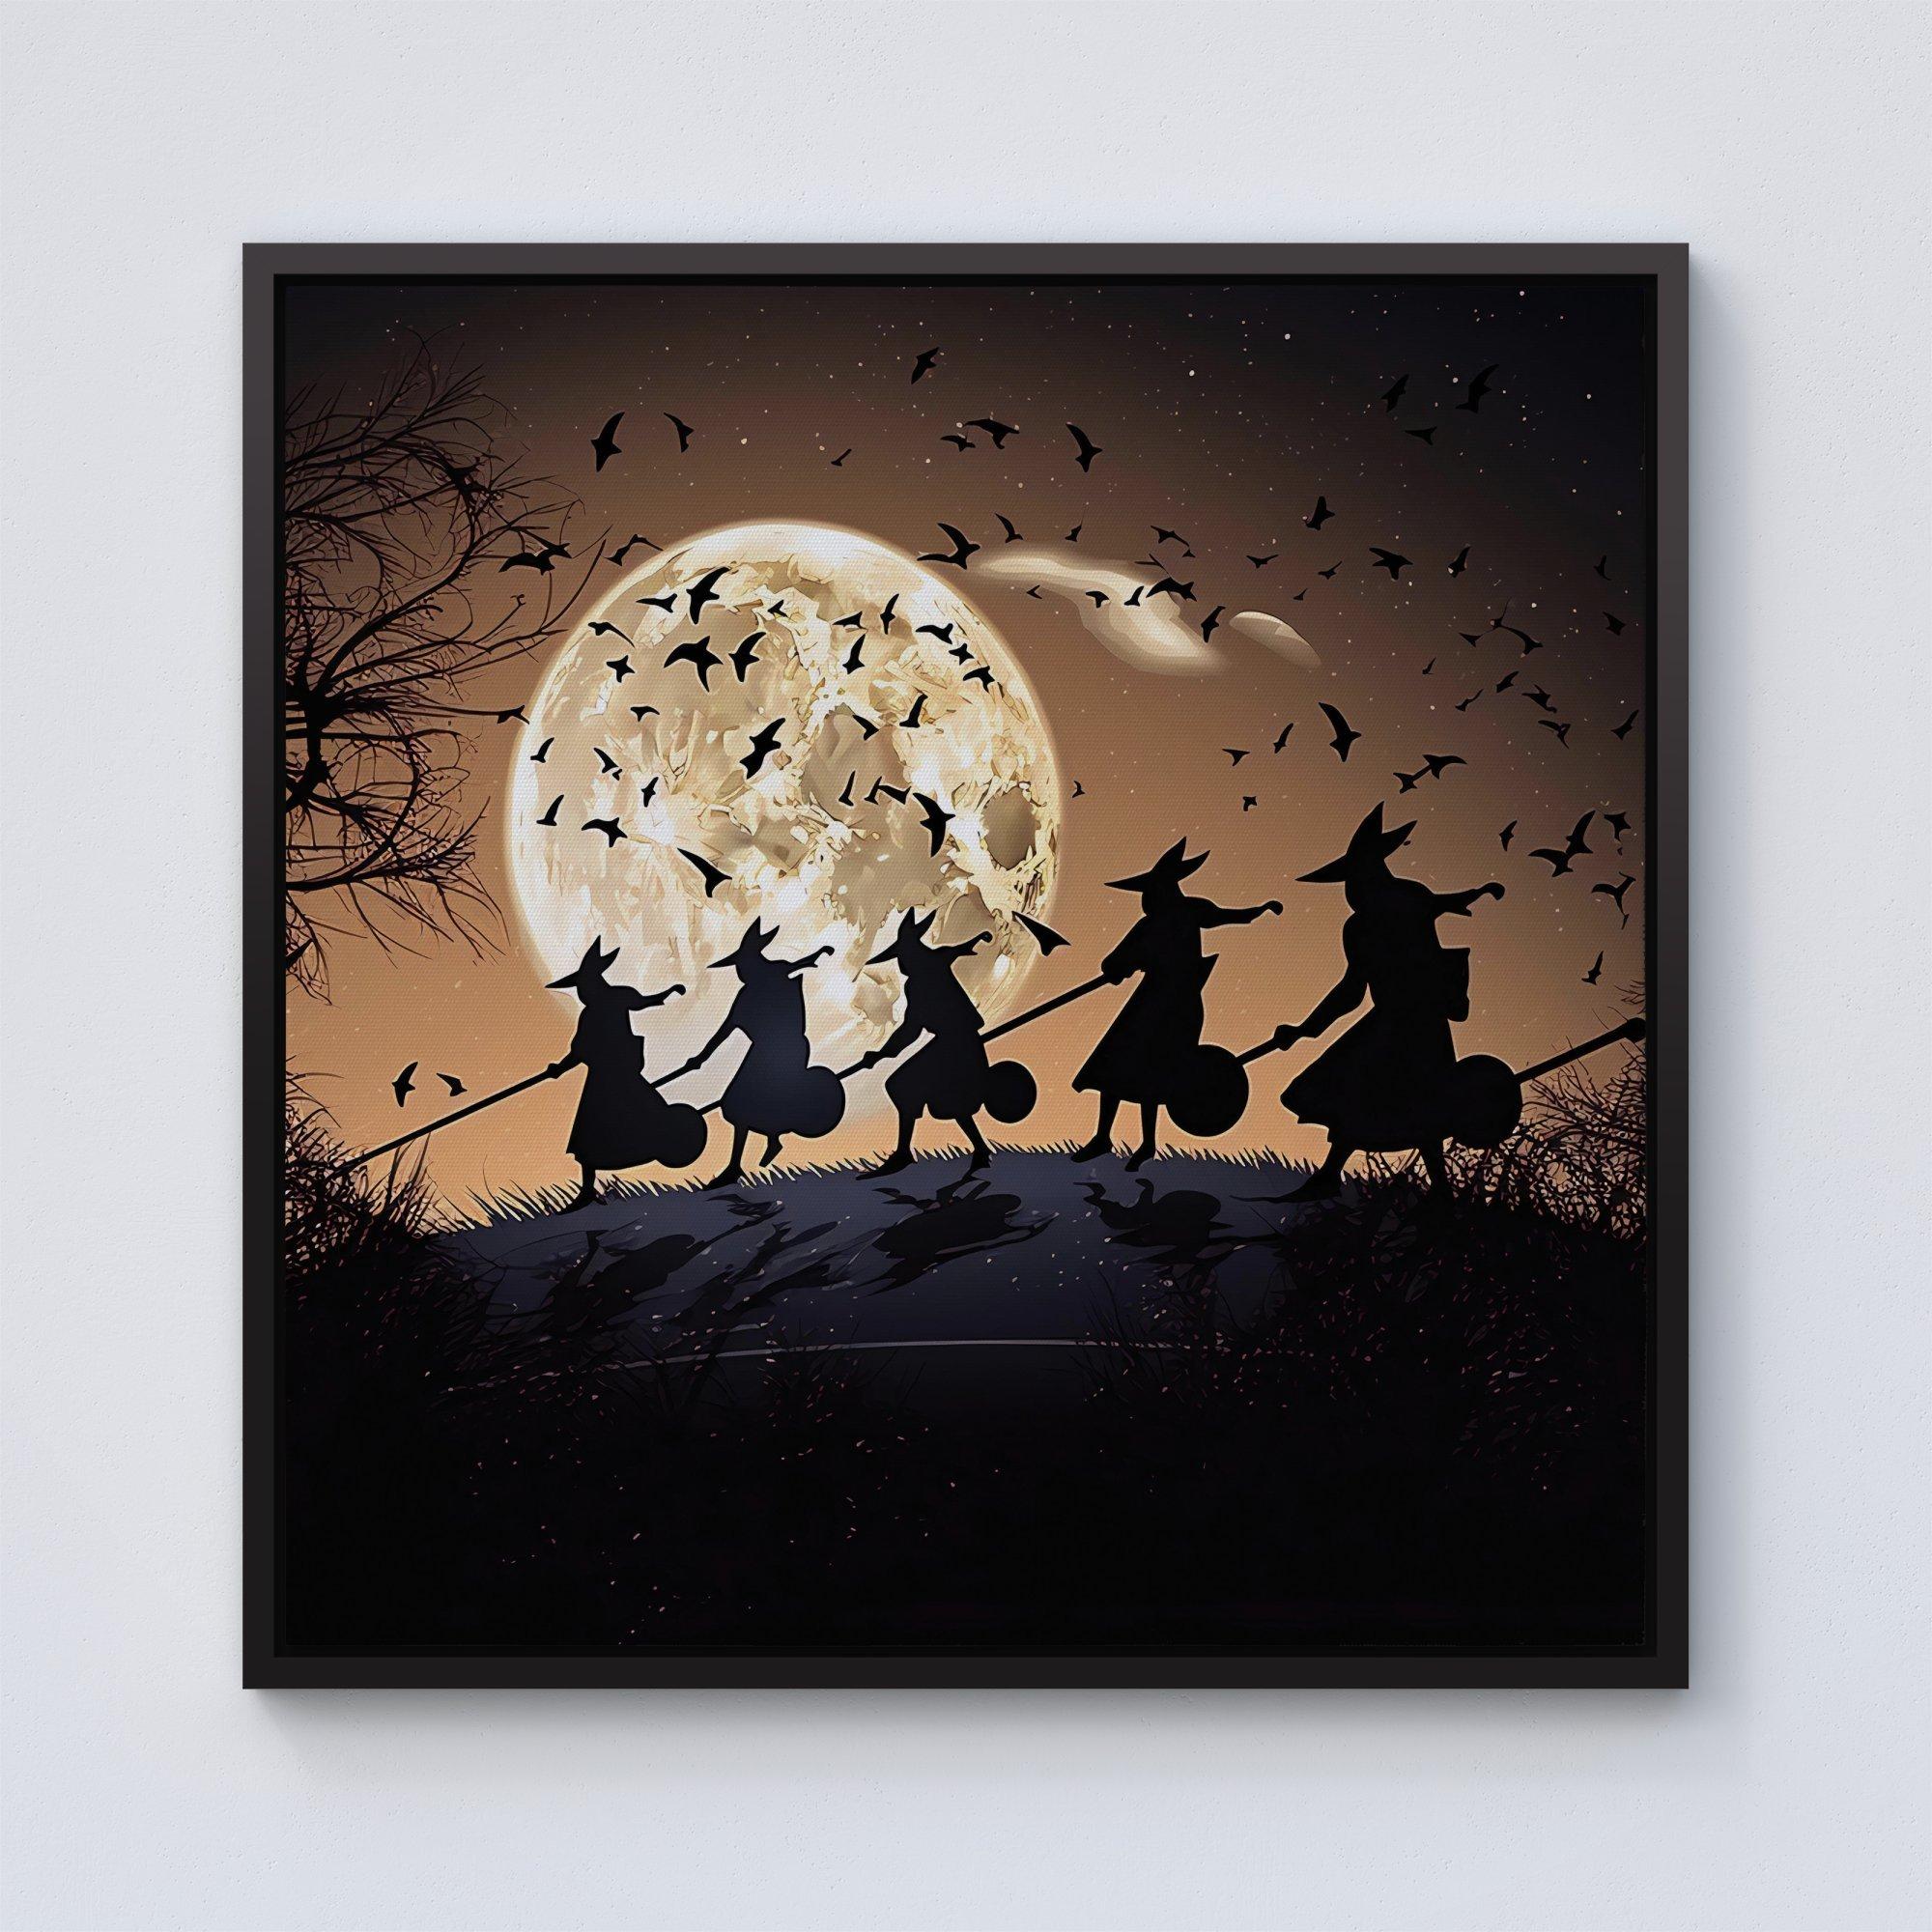 A Group Of Witches Riding Broomsticks Through The Night Framed Canvas